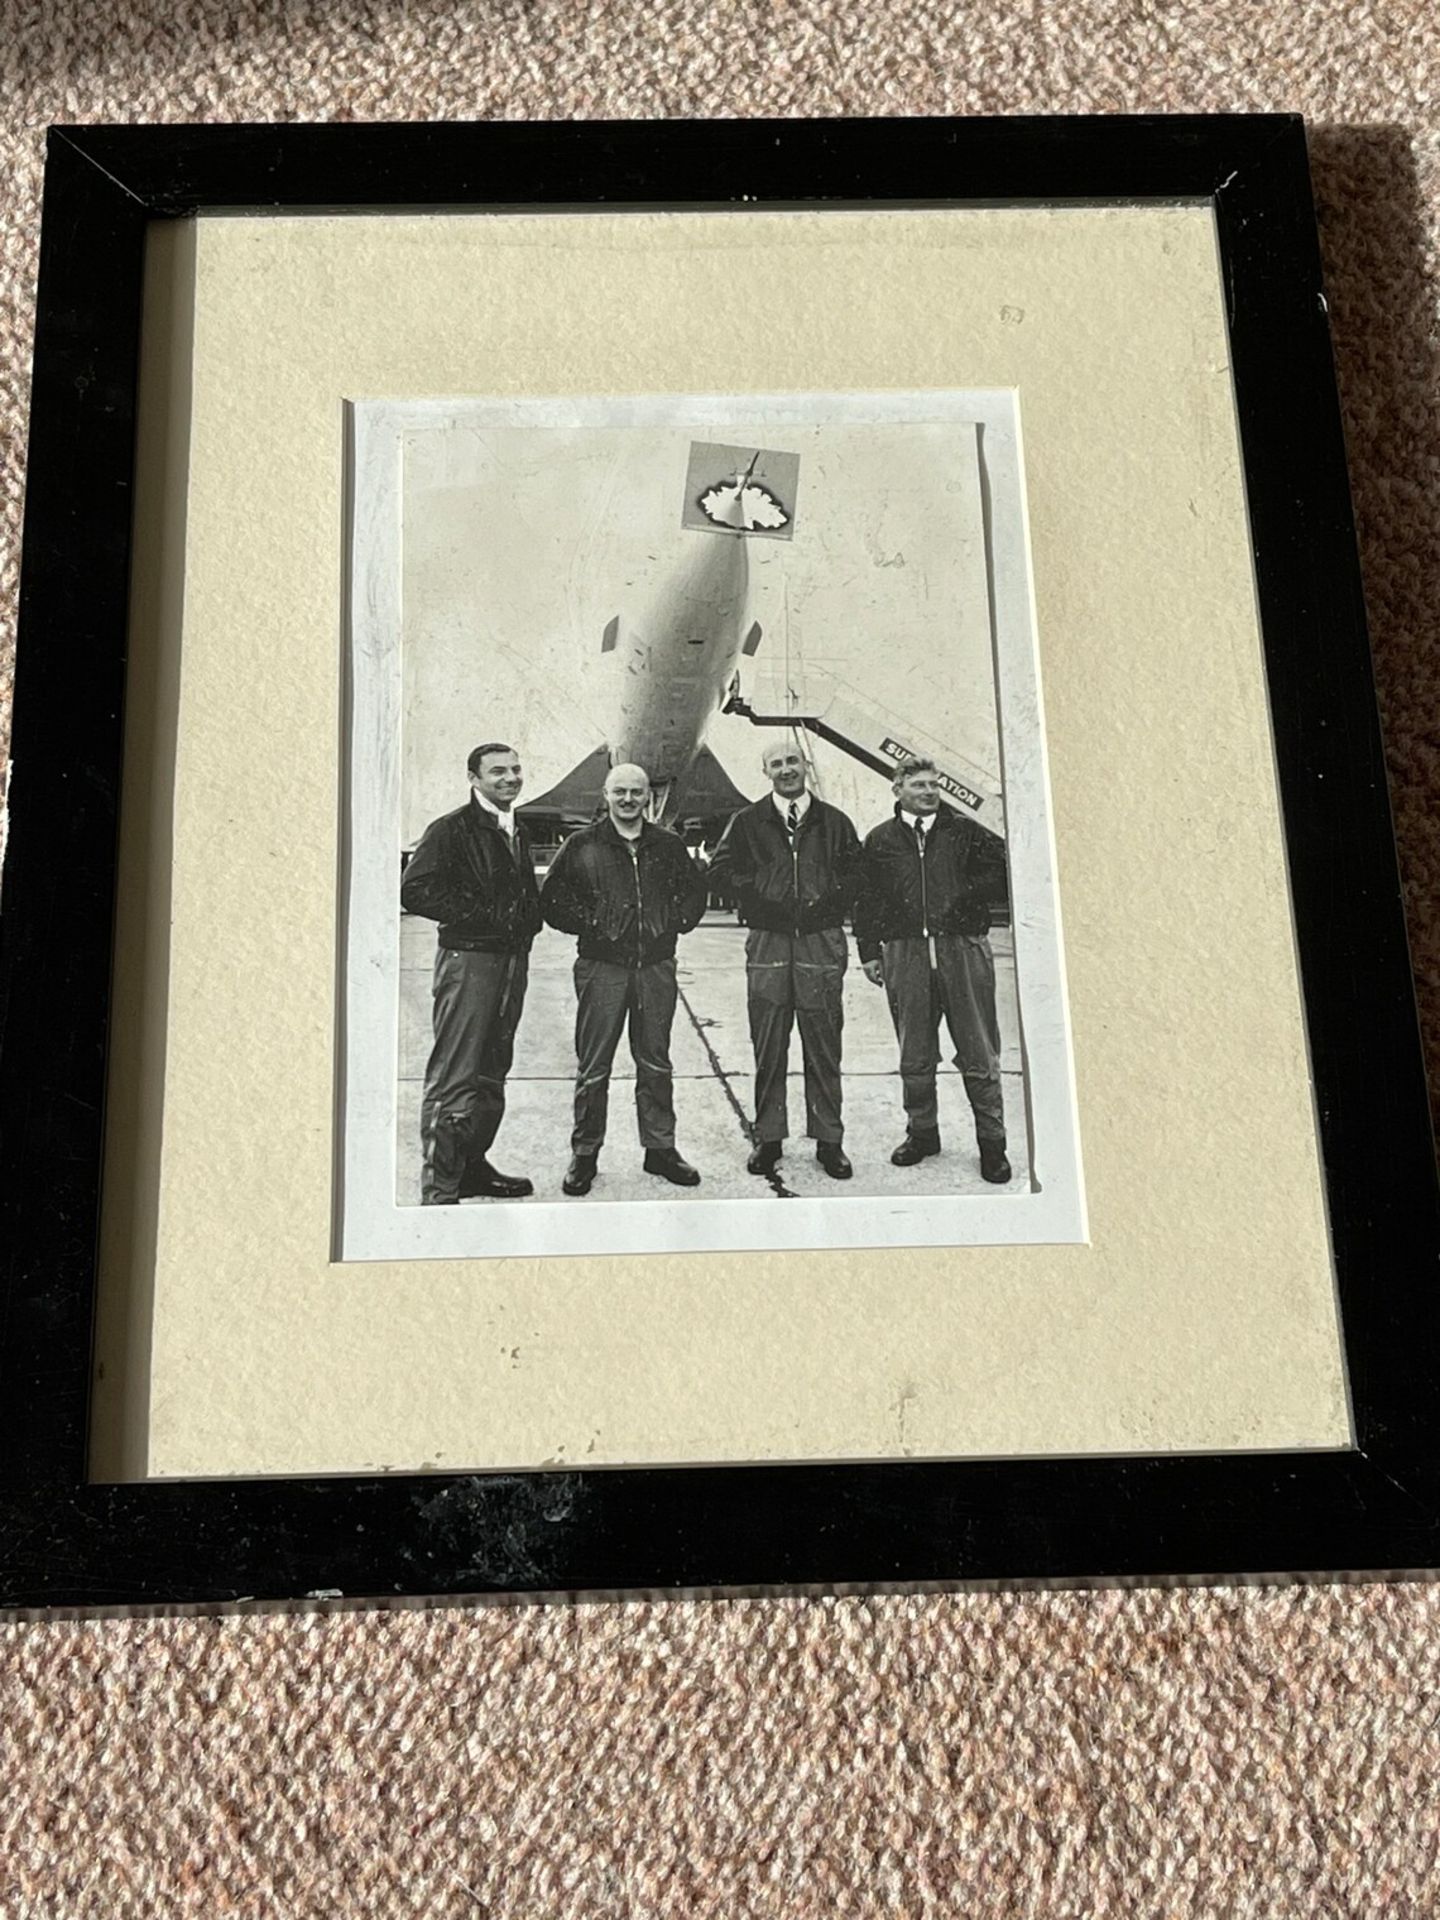 Very collectible picture frame of Air France's original crew members including the chief pilot - Image 2 of 4